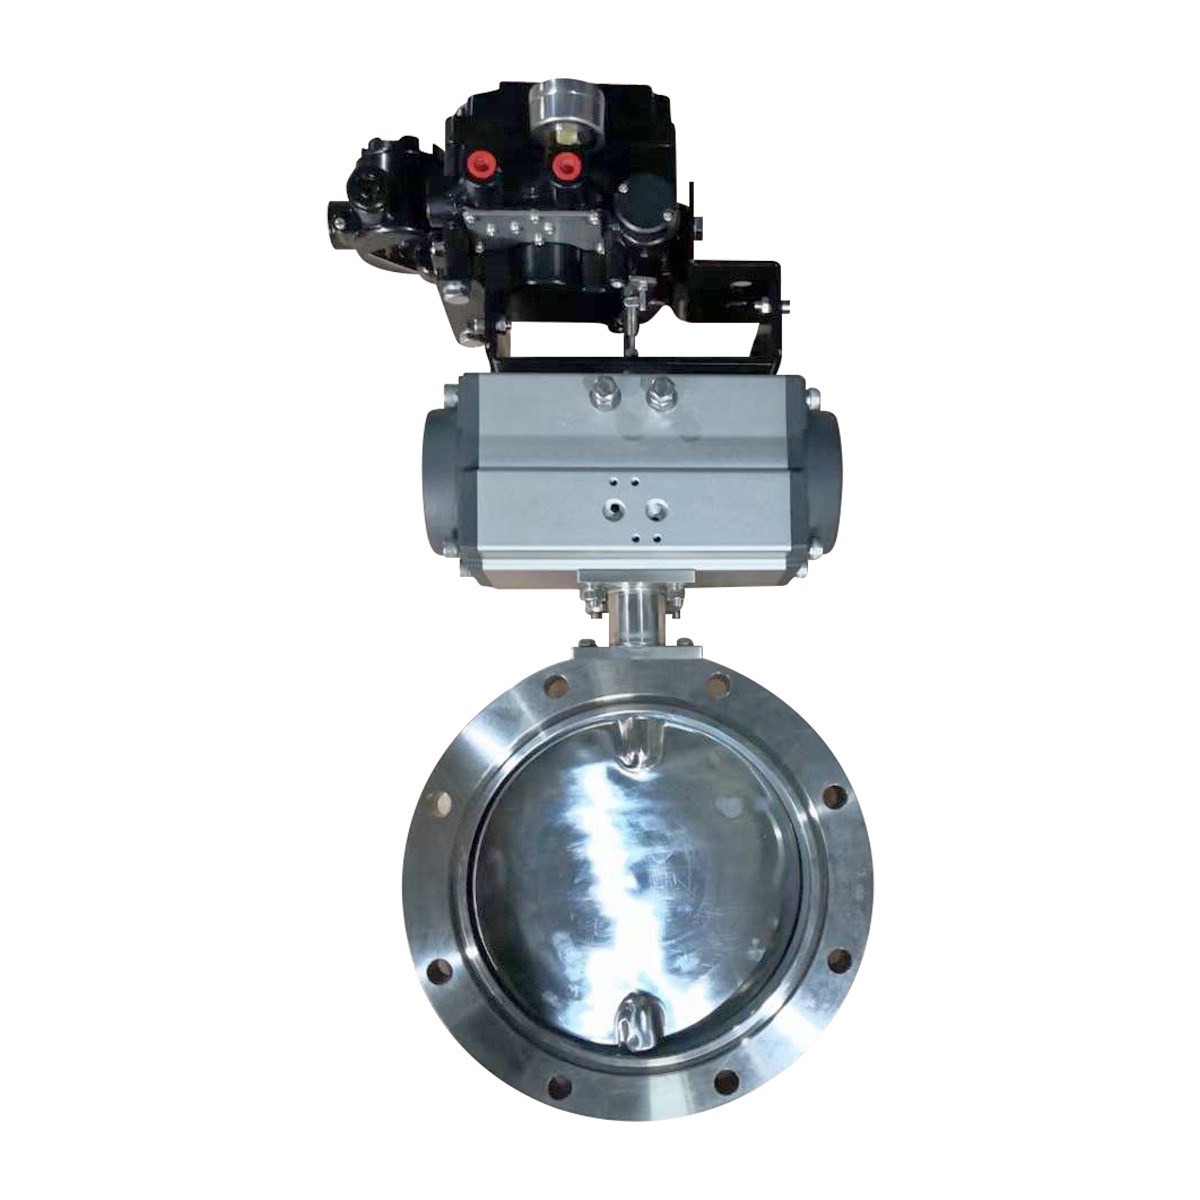 Flanged sanitary butterfly valve with pneumatic actuator